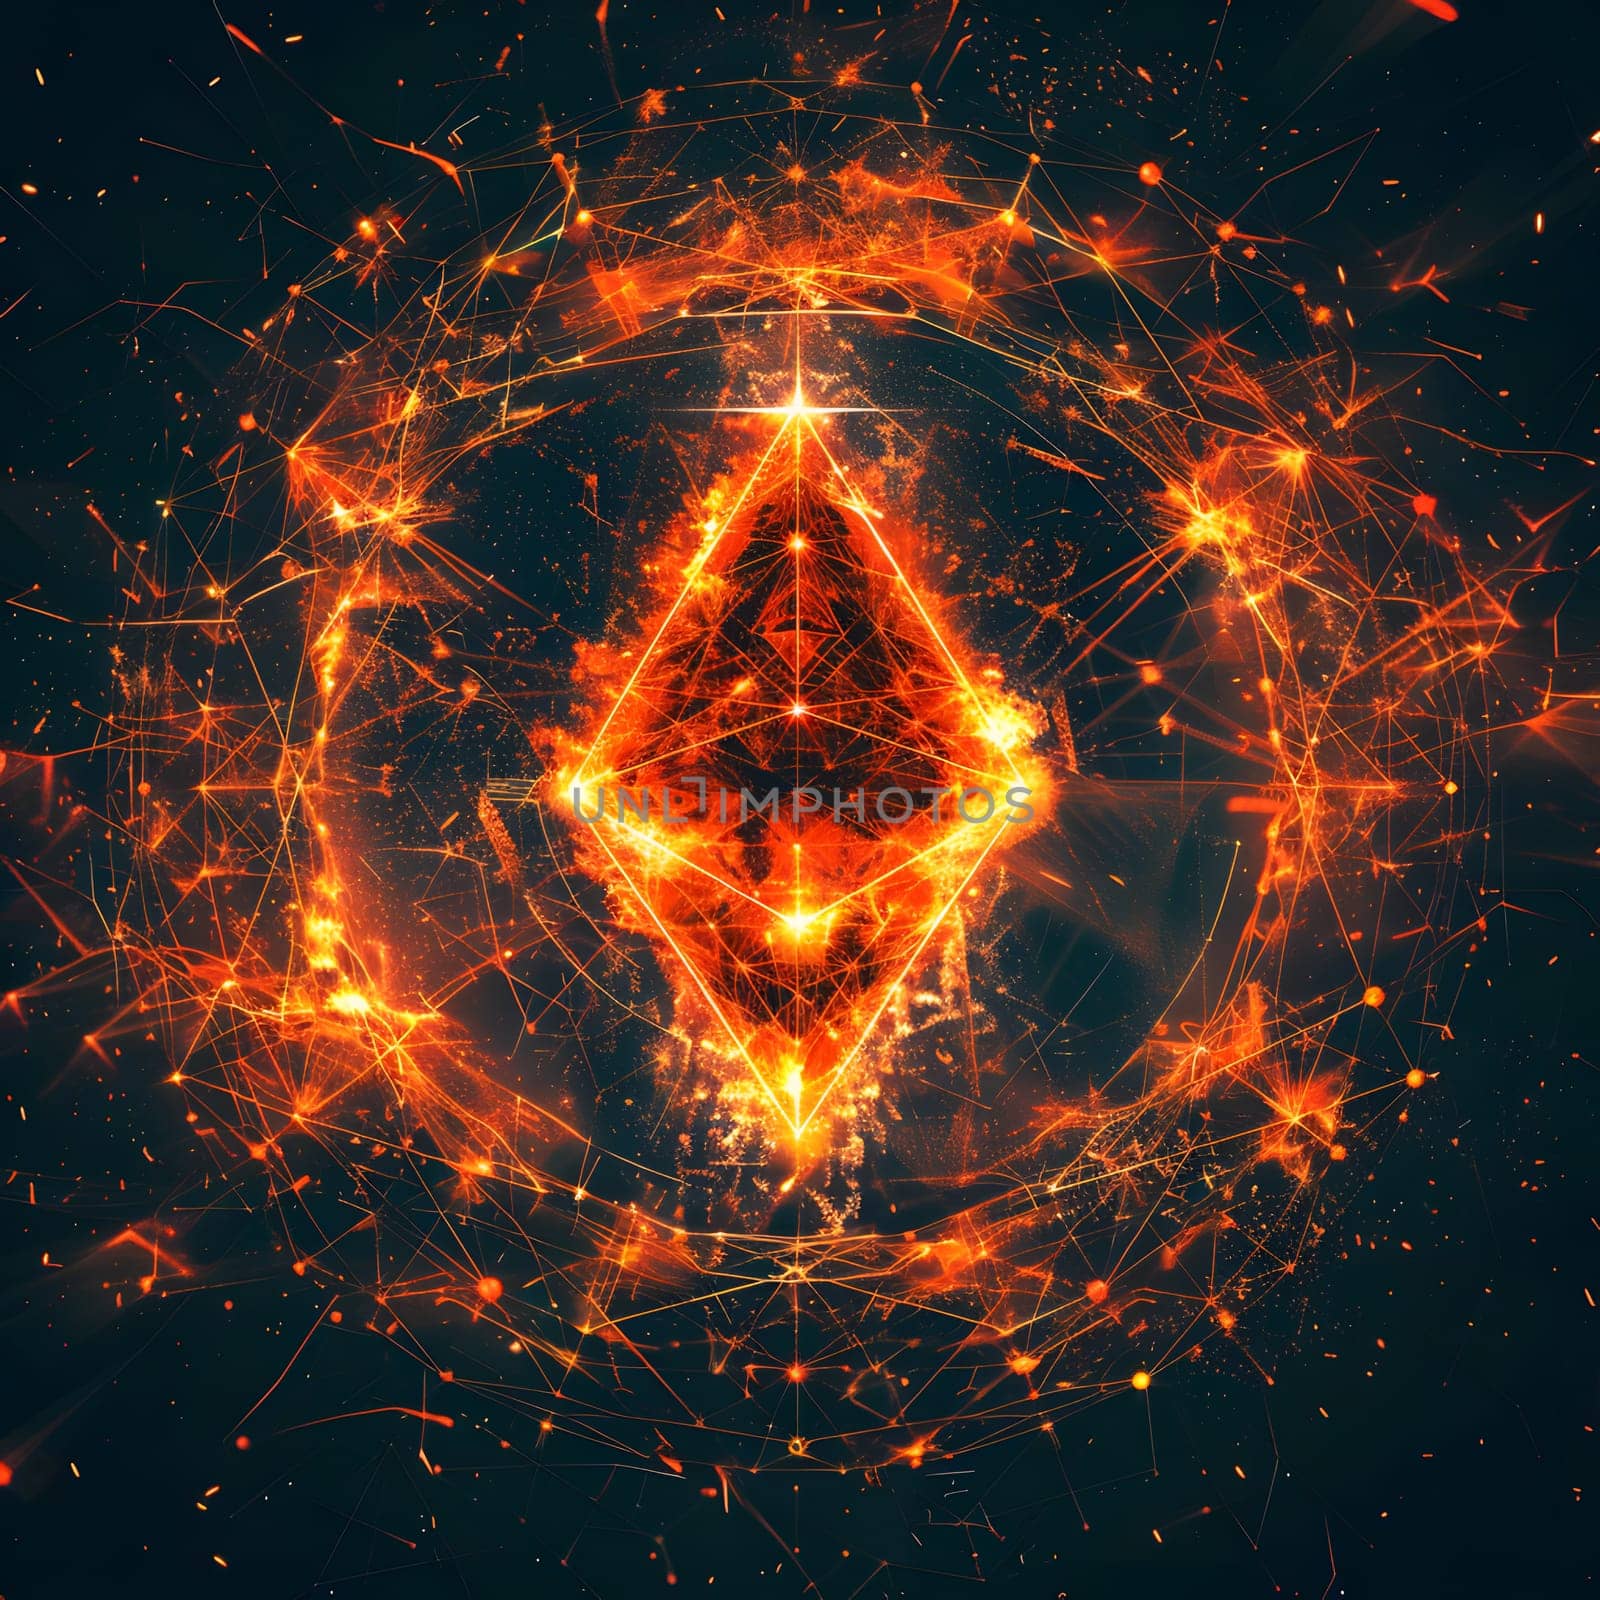 The ethereum logo is encircled by a fiery ring of heat by Nadtochiy